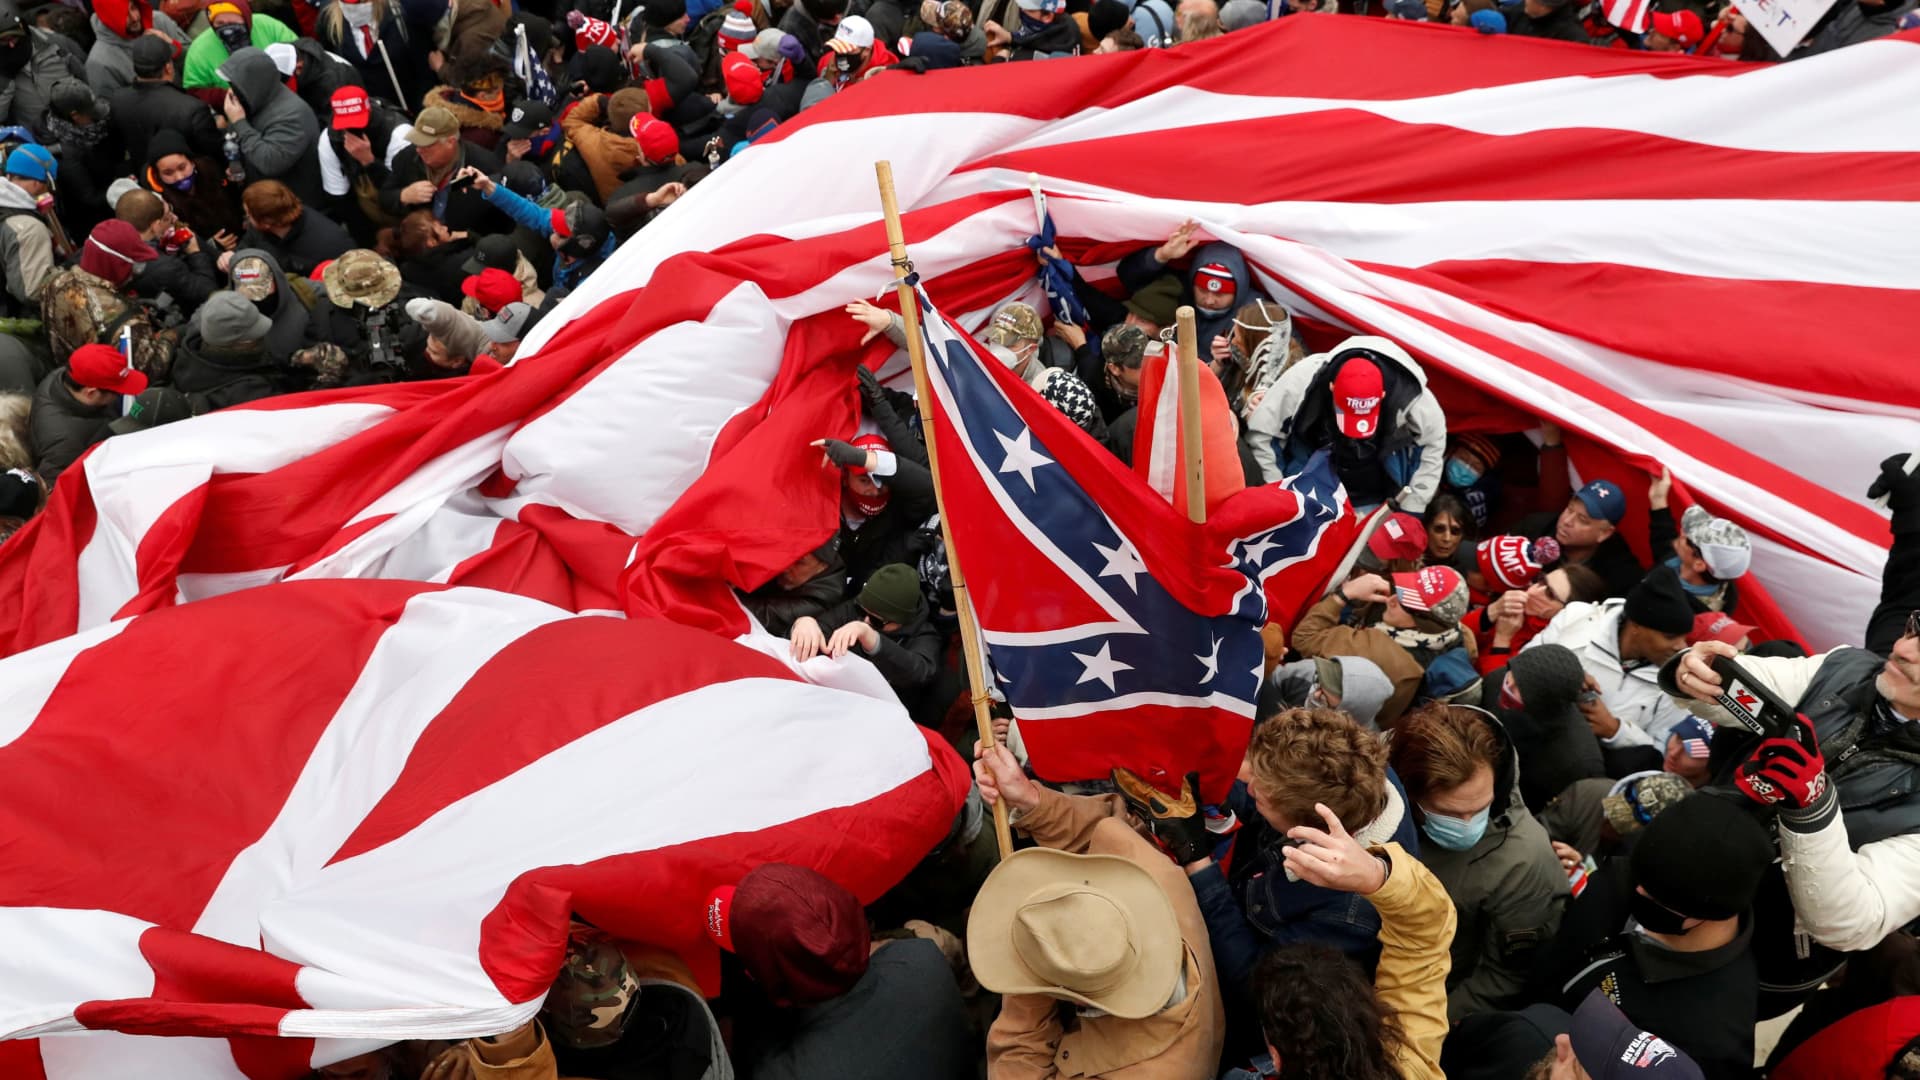 Protesters wave American and Confederate flags during clashes with Capitol police at a rally to contest the certification of the 2020 U.S. presidential election results by the U.S. Congress, at the U.S. Capitol Building in Washington, January 6, 2021.